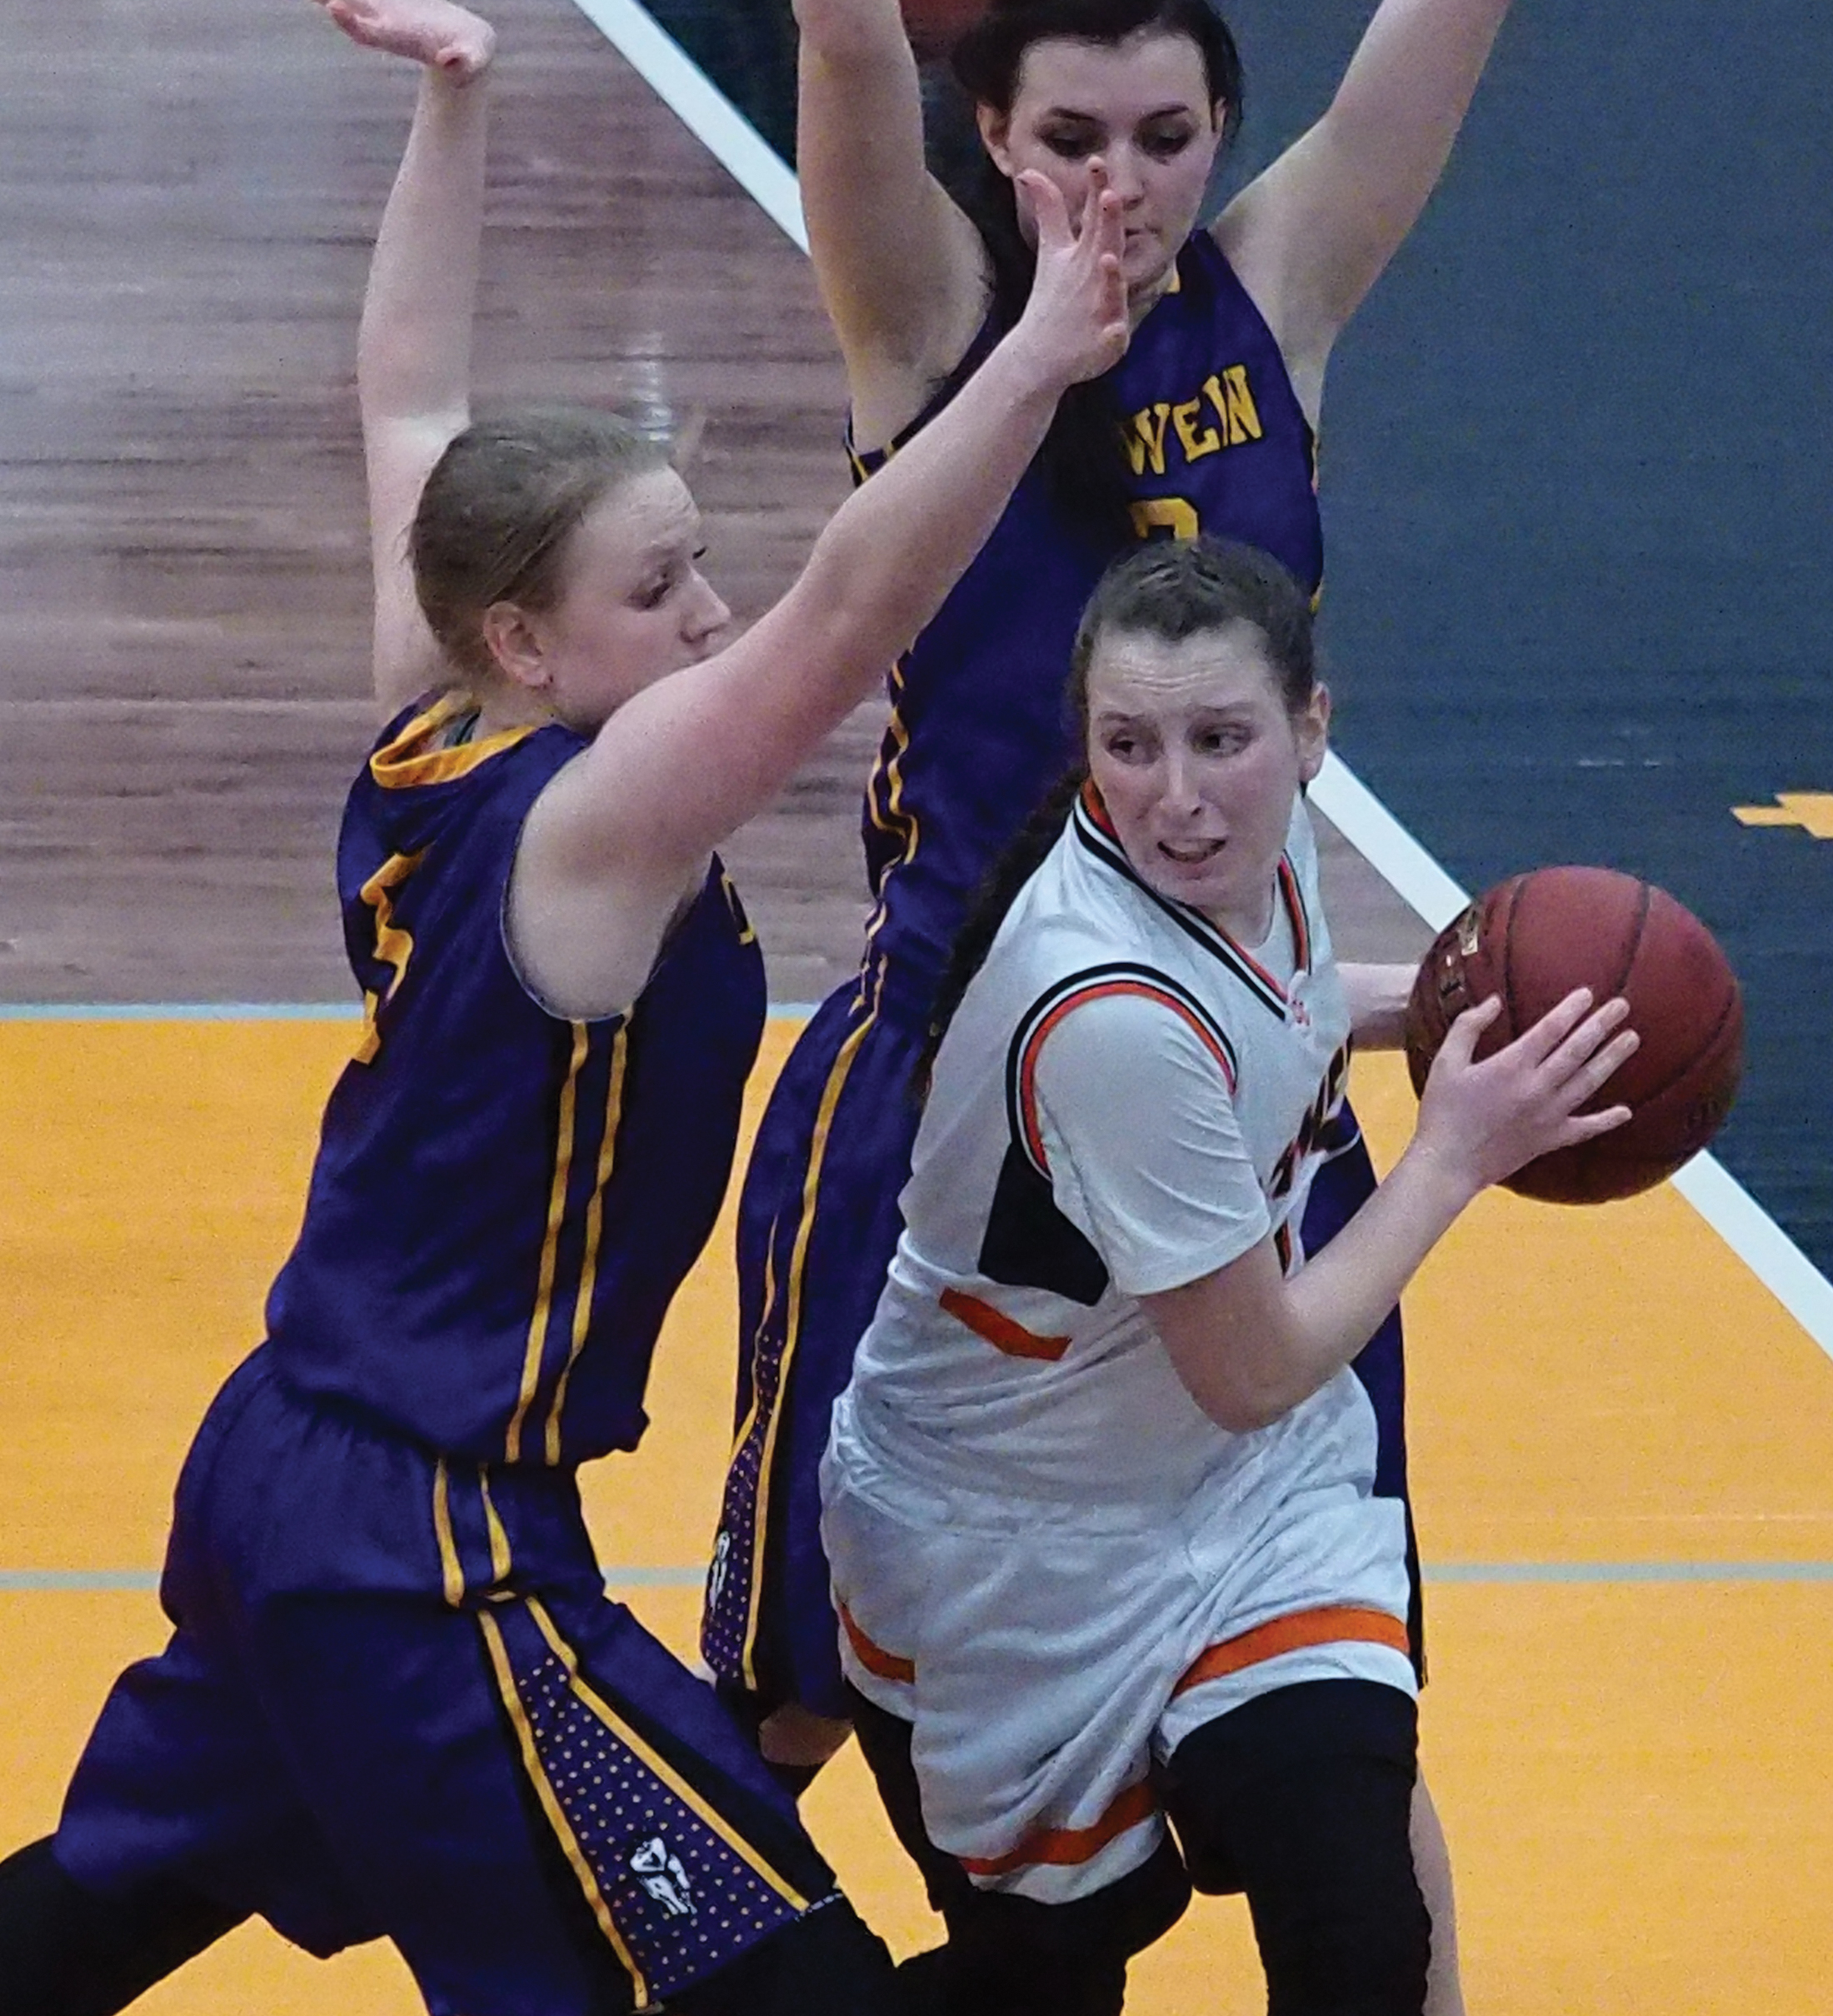 Comet girls lose to Oelwein, 56-37, after fast start